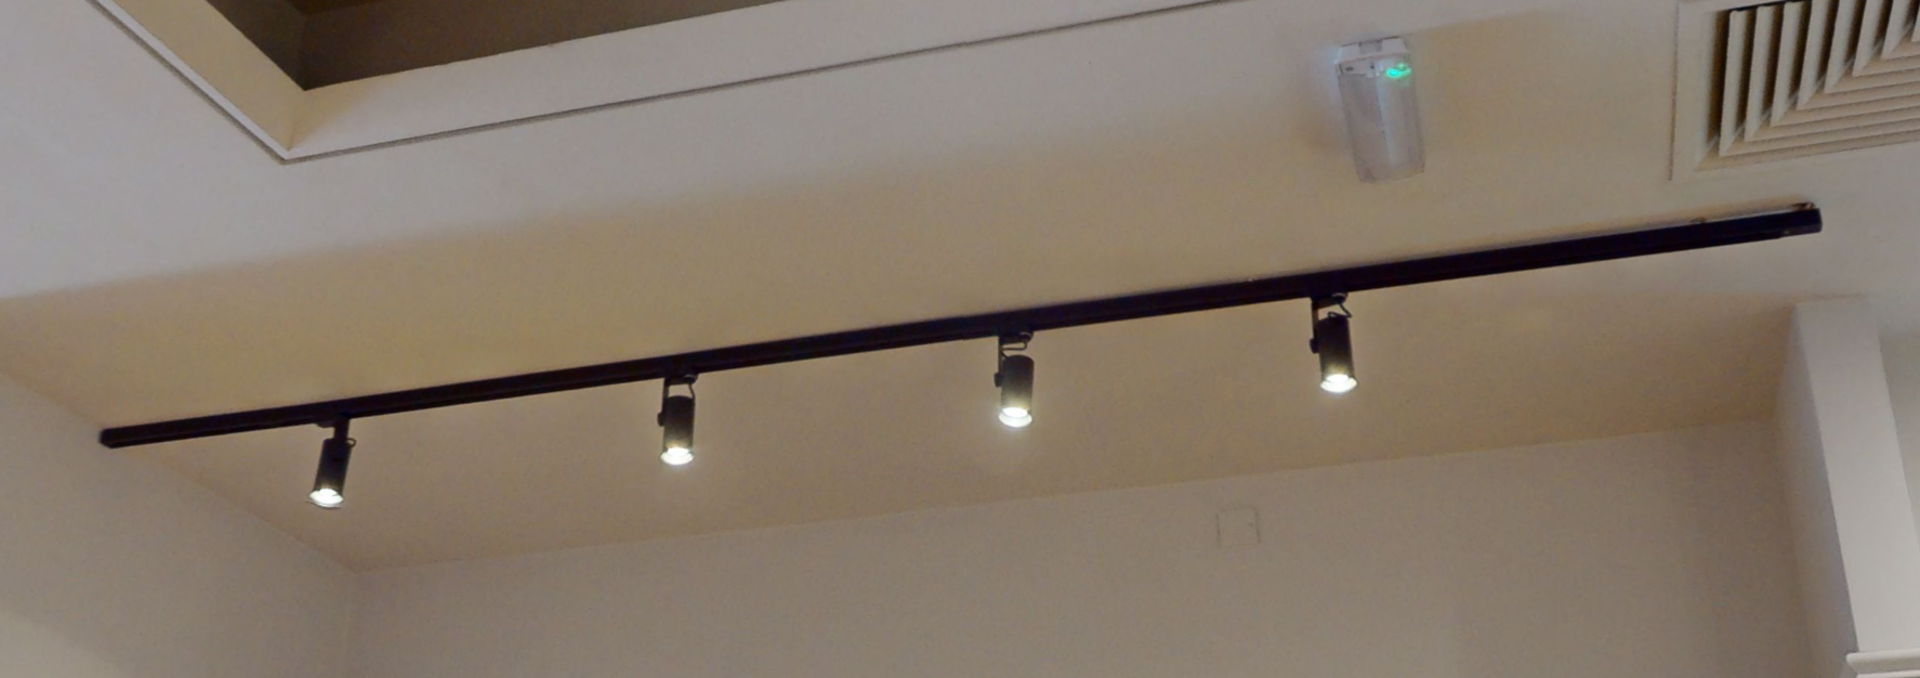 2 x Track Light Fittings Featuring Four Spotlights on Each - Image 3 of 3